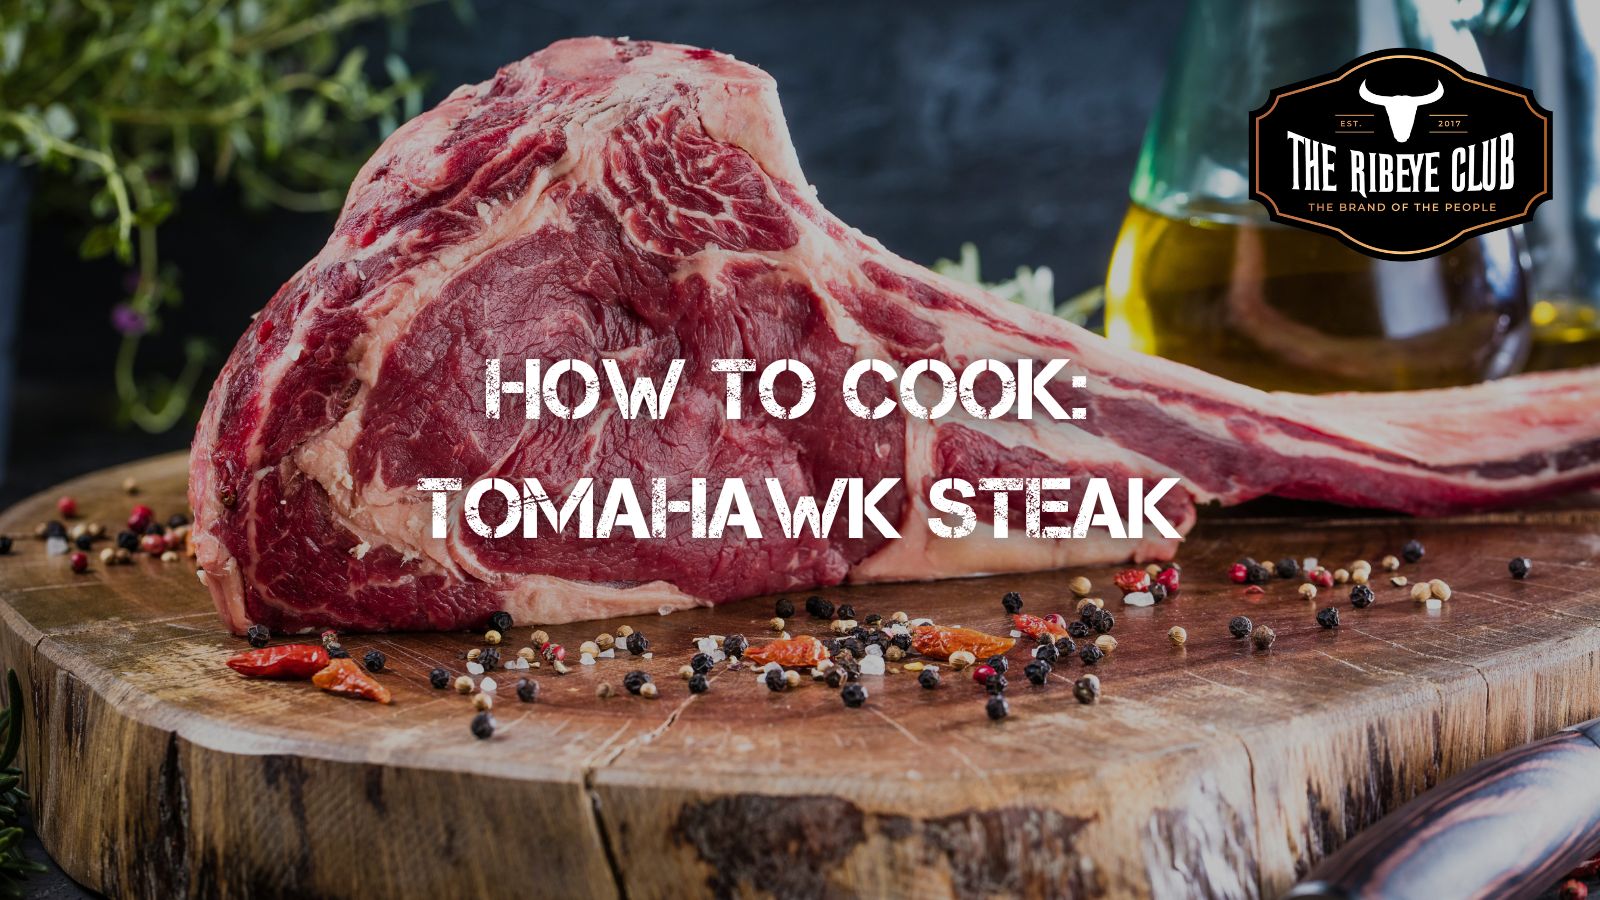 How to Cook: Tomahawk steak